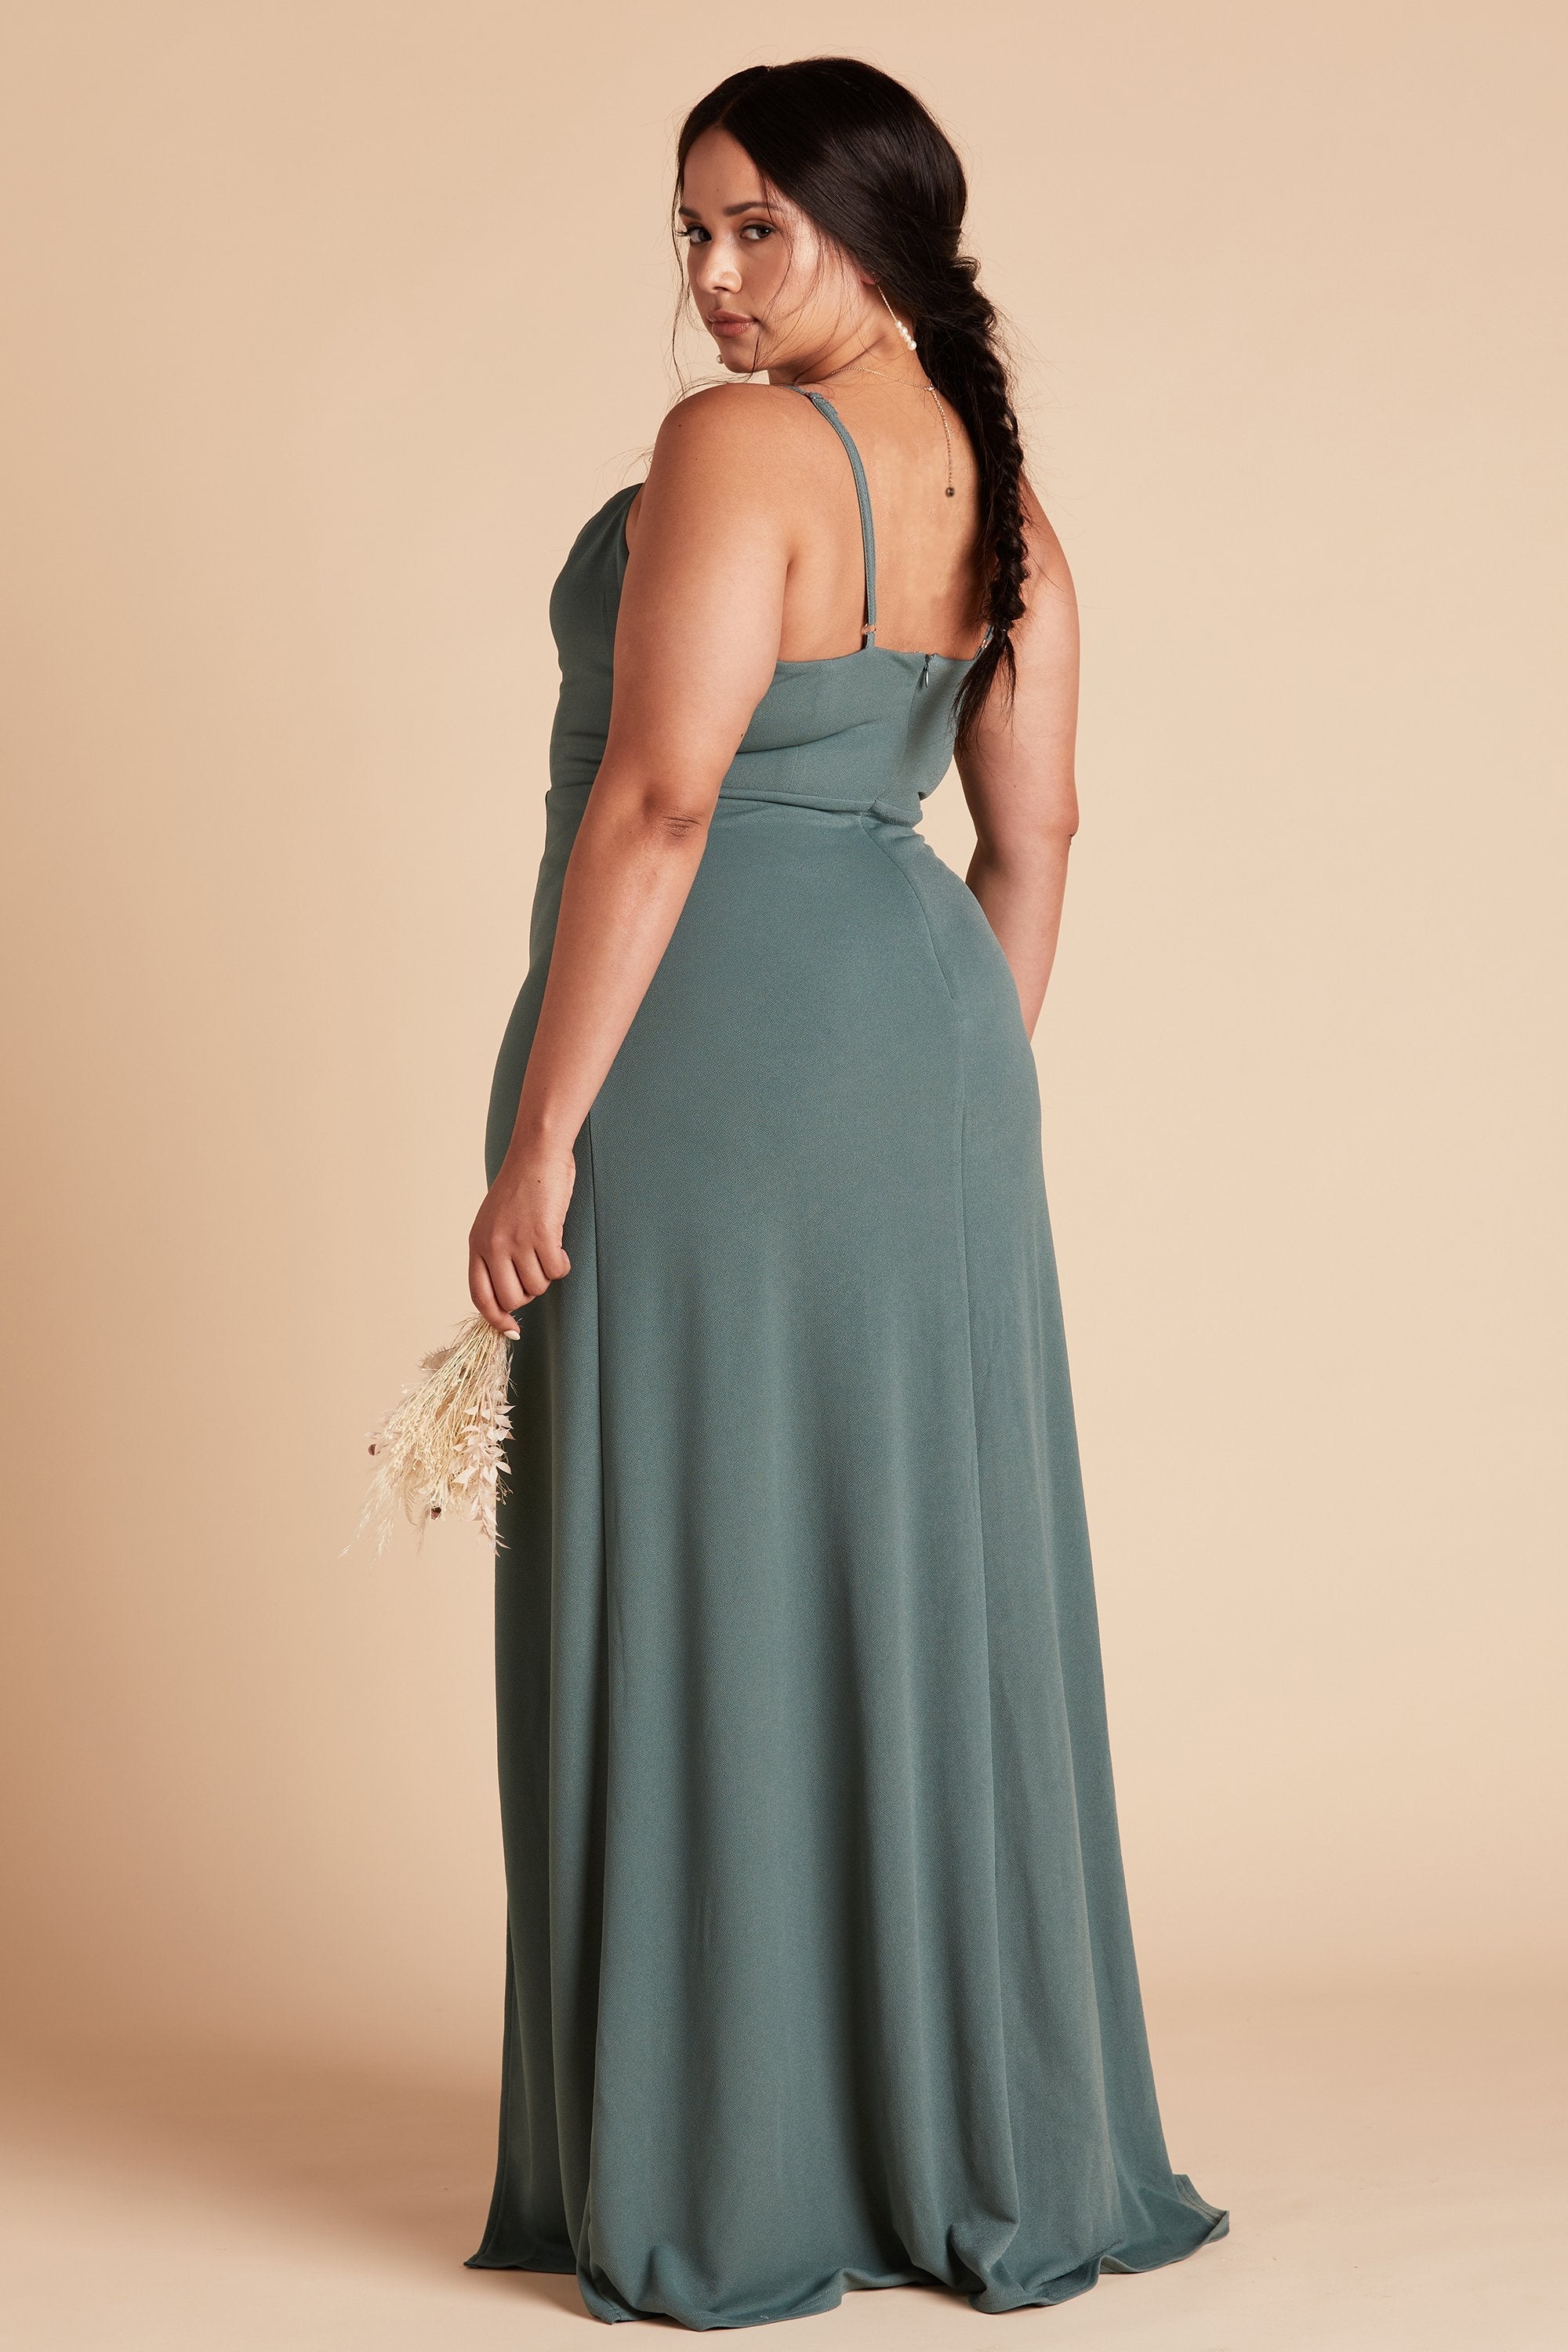 Back view of the Ash Plus Size Bridesmaid Dress in sea glass crepe shows off a cut that flatters curves with a fitted waist and flowing skirt.